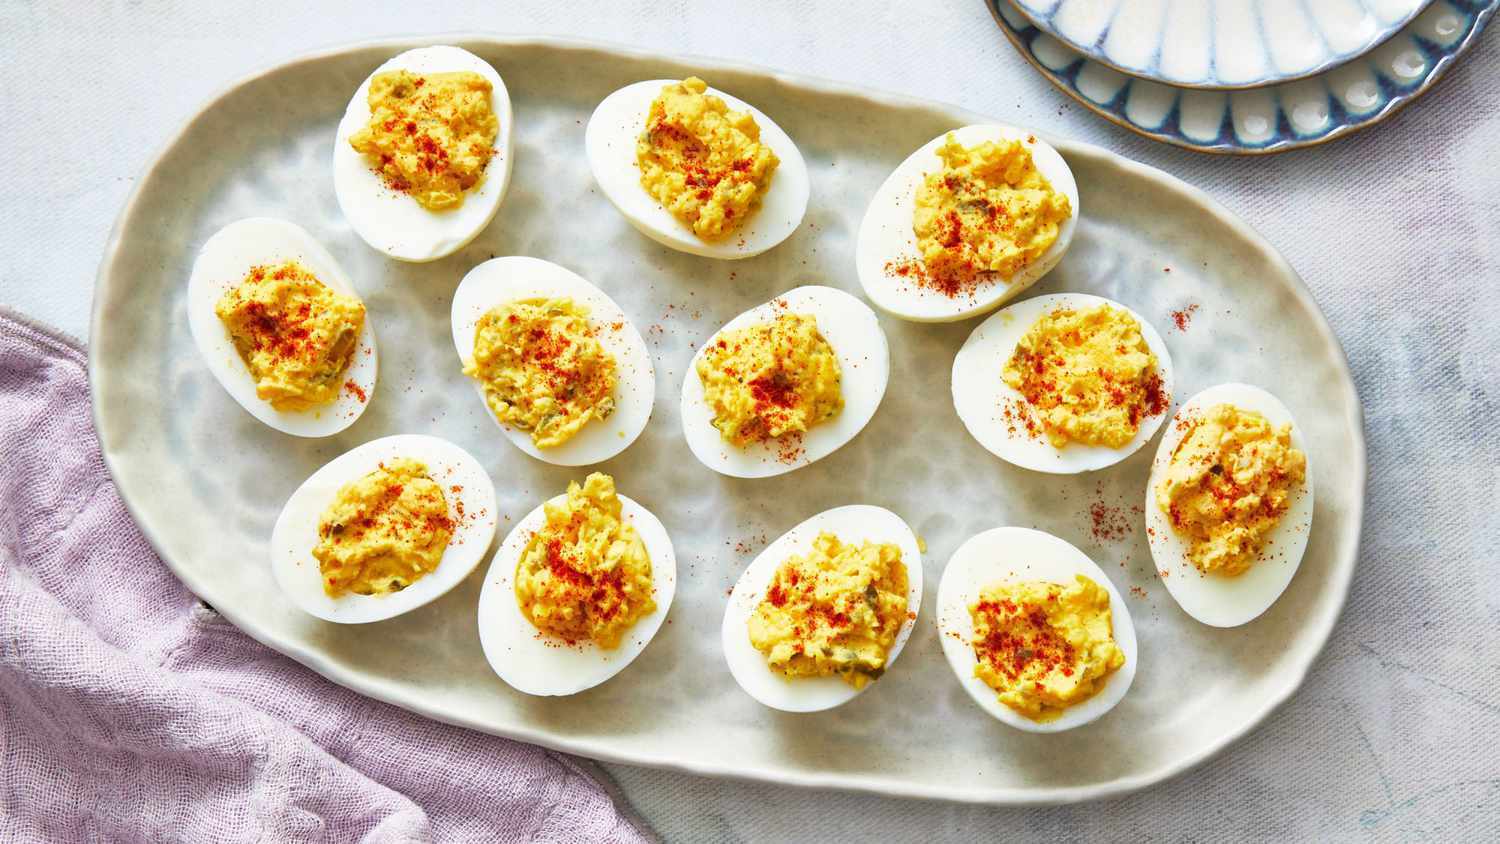 How to cook eggs deliciously